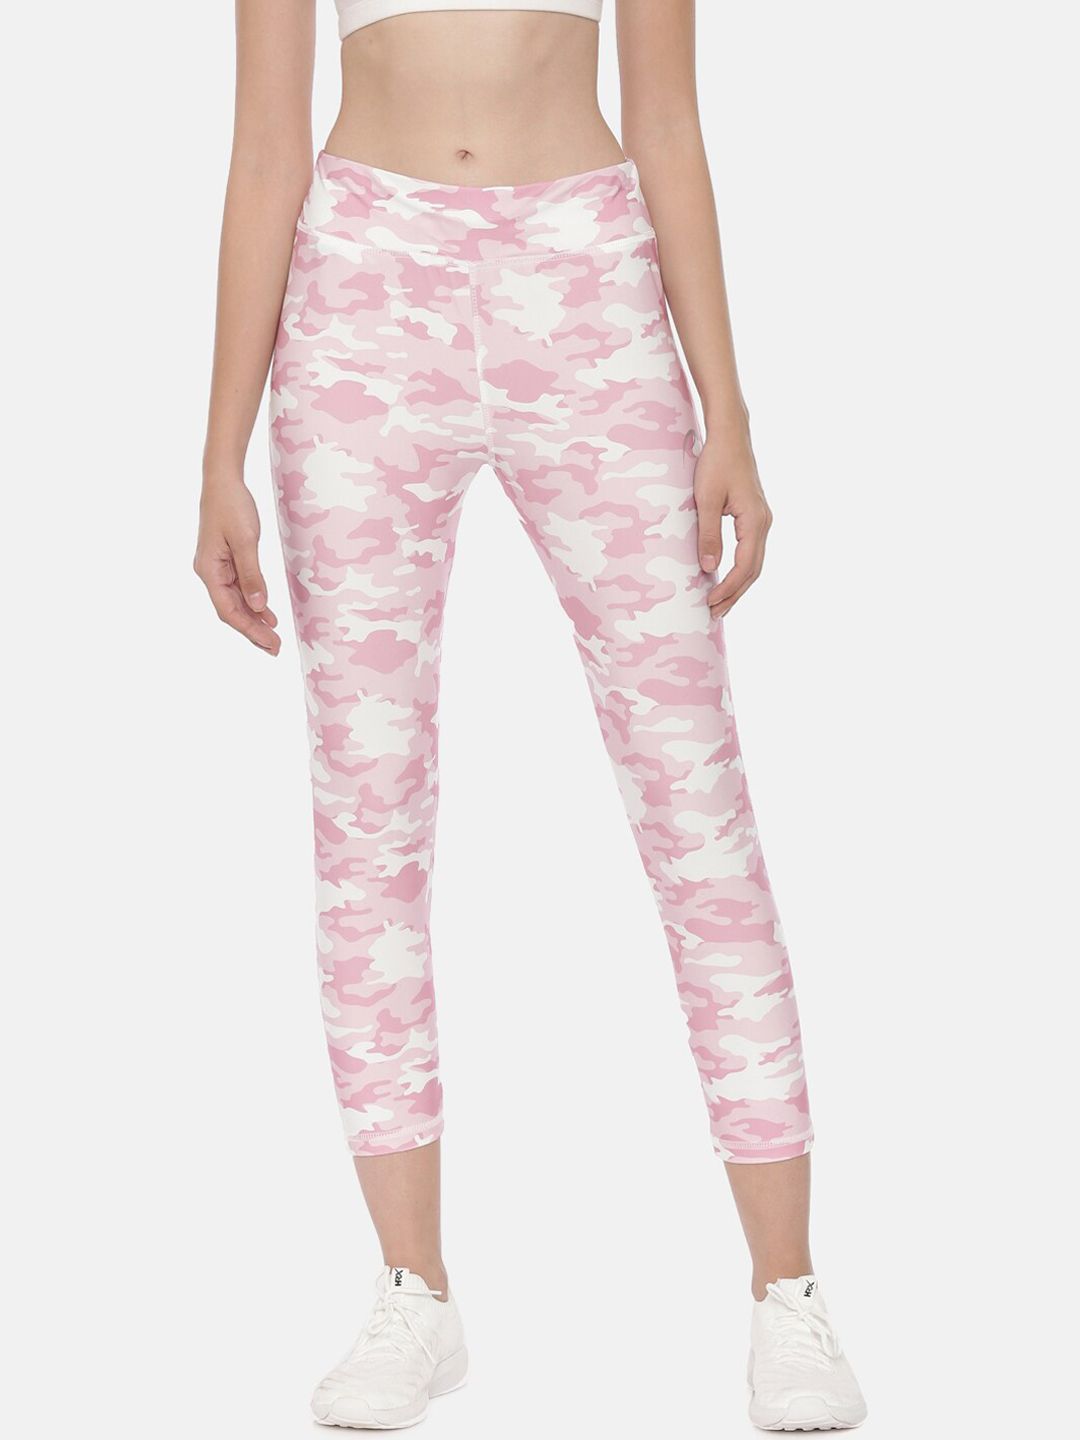 Proline Women Pink & White Camouflage Printed Tights Price in India